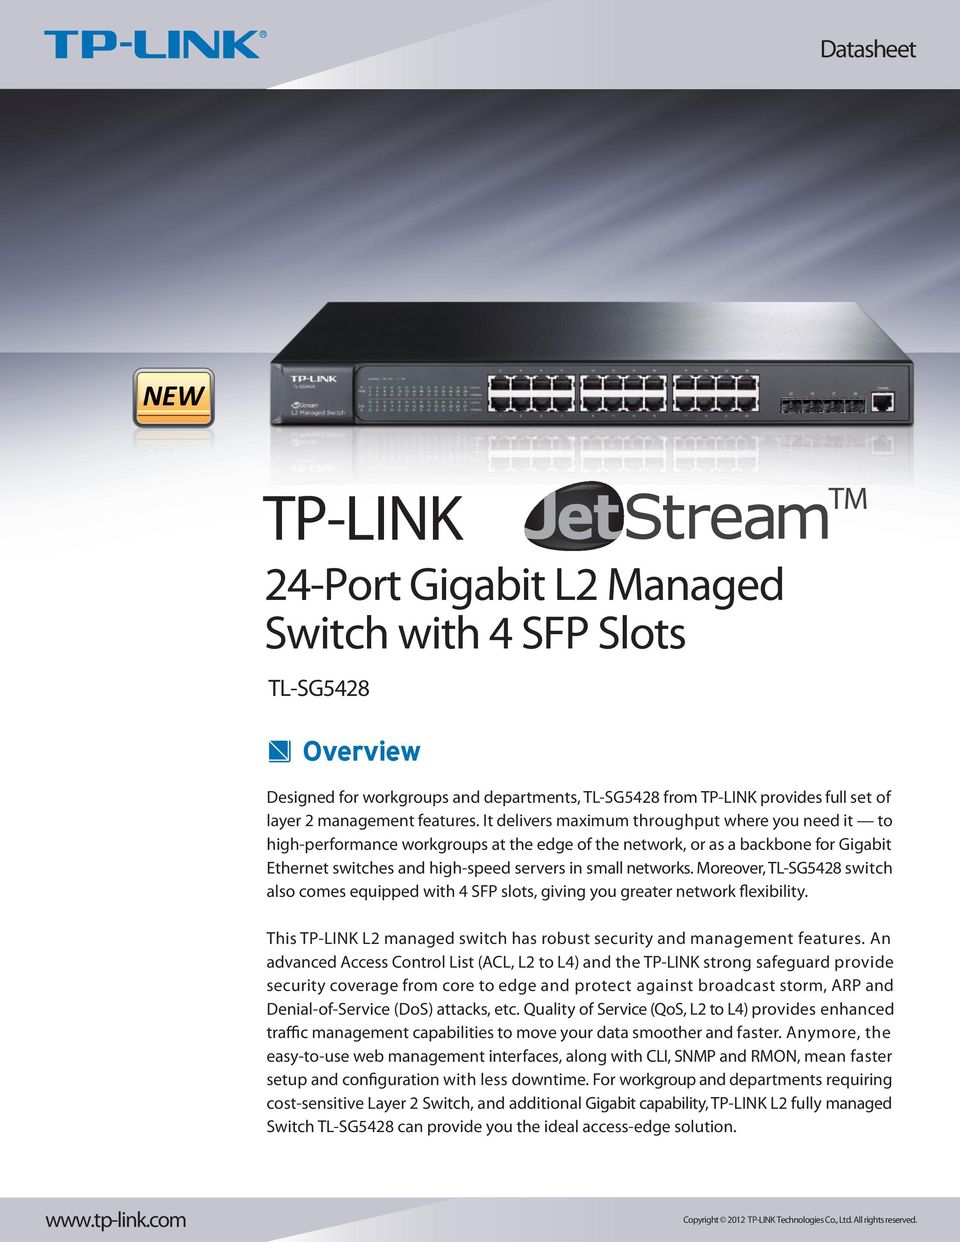 Moreover, switch also comes equipped with 4 SFP slots, giving you greater network flexibility. This TP-LINK L2 managed switch has robust security and management features.